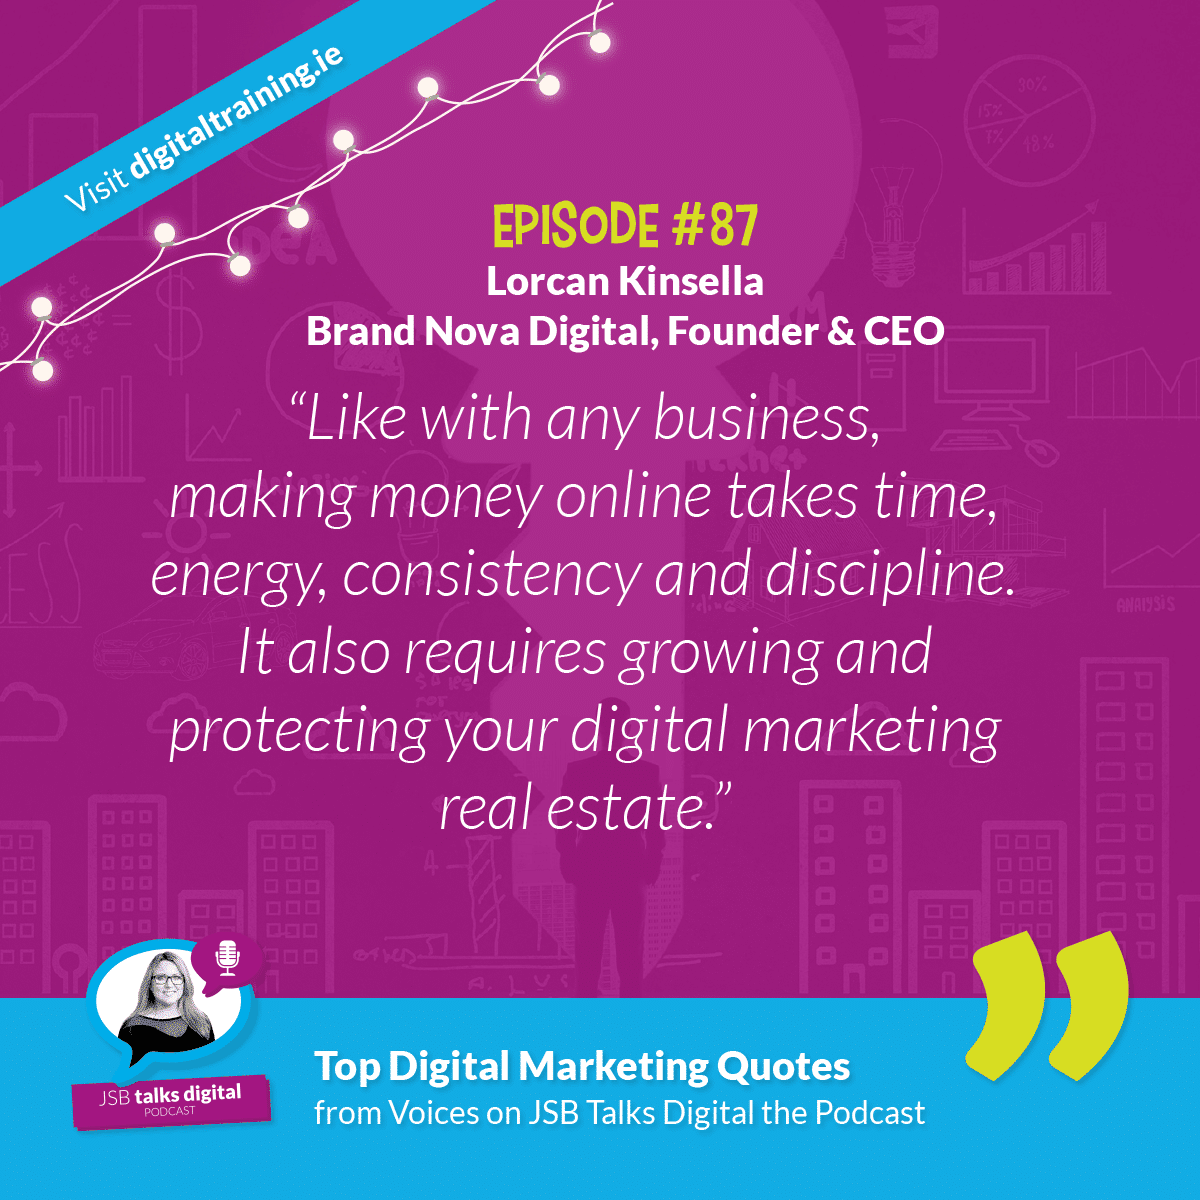 “Like with any business, making money online takes time, energy, consistency and discipline. It also requires growing and protecting your digital marketing real estate.” - Lorcan Kinsella